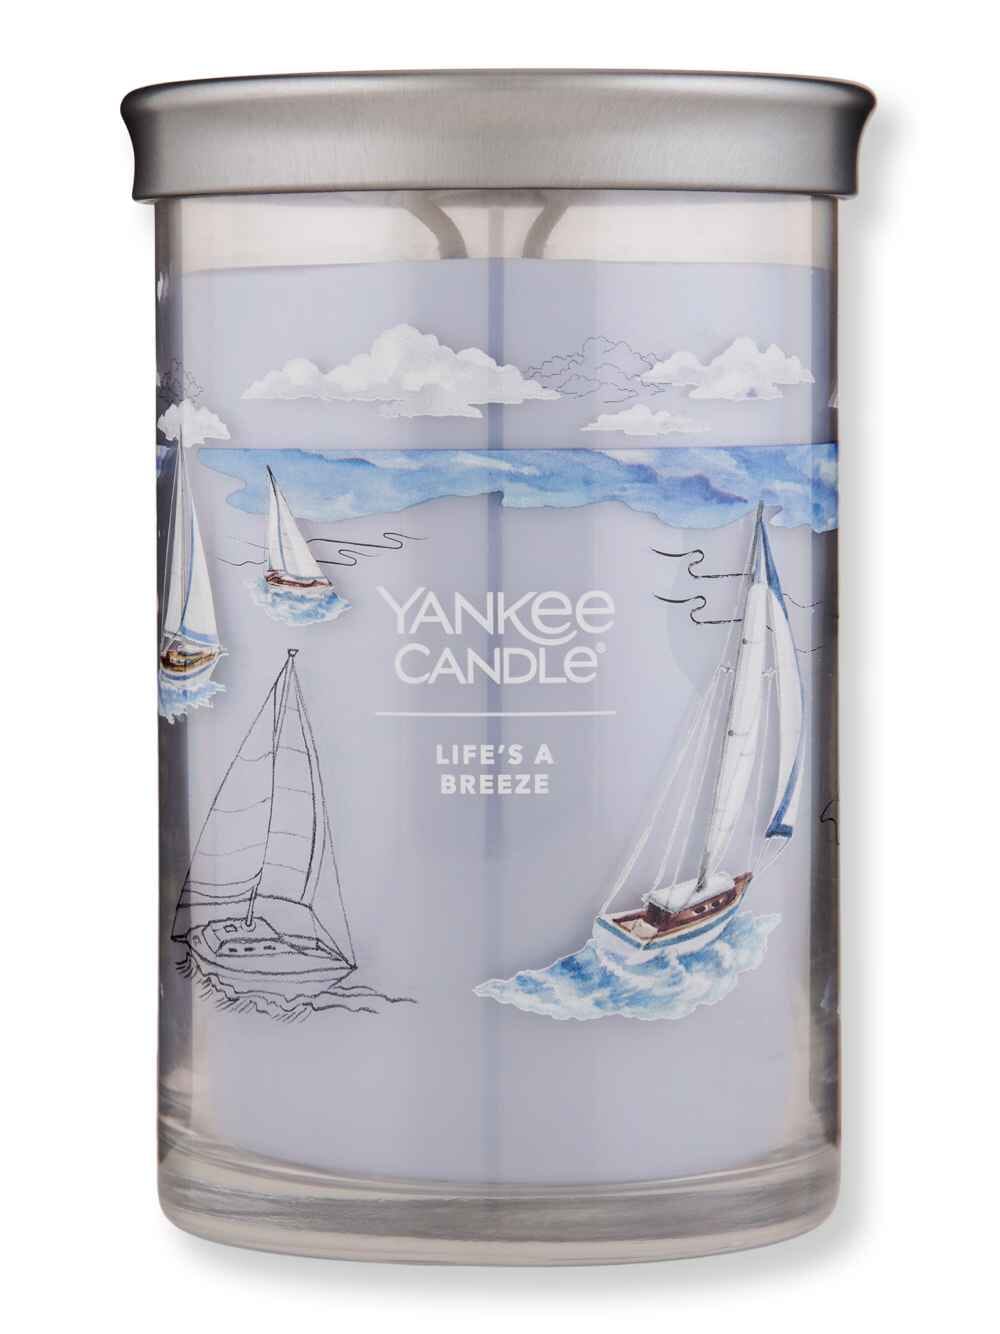 Yankee Candle Yankee Candle Life's A Breeze Signature Large 2-Wick Tumbler Candle 20 oz Candles & Diffusers 